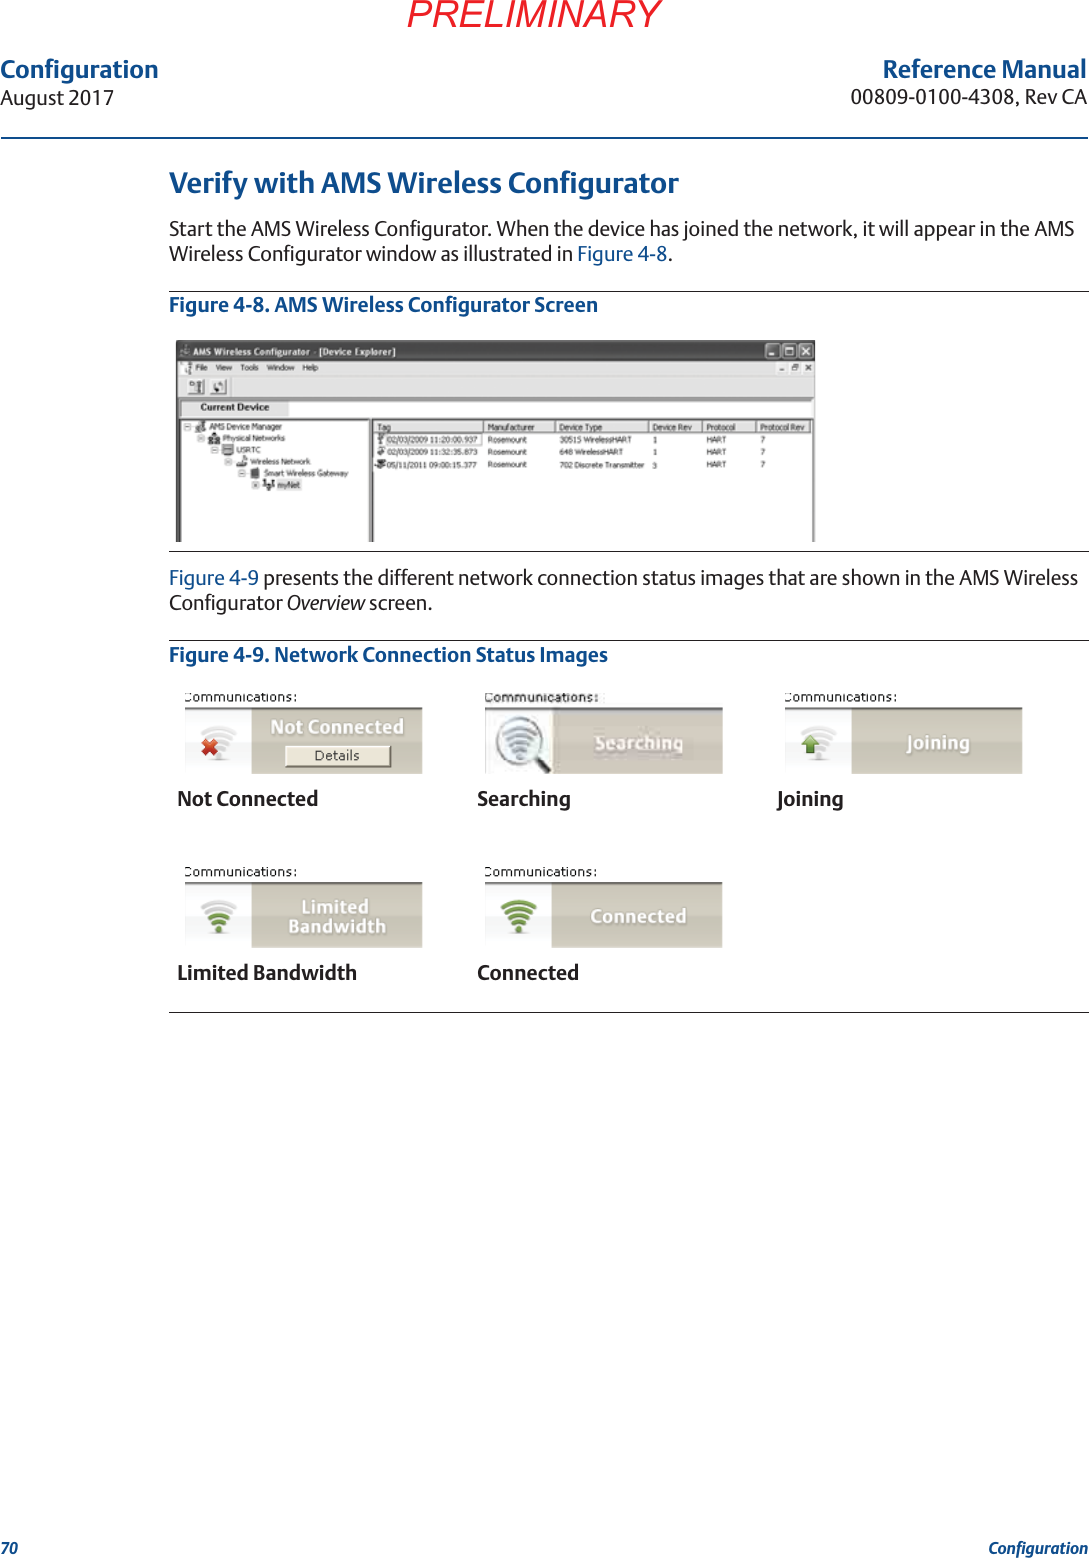 70ConfigurationAugust 2017ConfigurationPRELIMINARYReference Manual00809-0100-4308, Rev CAVerify with AMS Wireless ConfiguratorStart the AMS Wireless Configurator. When the device has joined the network, it will appear in the AMS Wireless Configurator window as illustrated in Figure 4-8.Figure 4-8. AMS Wireless Configurator ScreenFigure 4-9 presents the different network connection status images that are shown in the AMS Wireless Configurator Overview screen.Figure 4-9. Network Connection Status ImagesNot Connected Searching JoiningLimited Bandwidth Connected